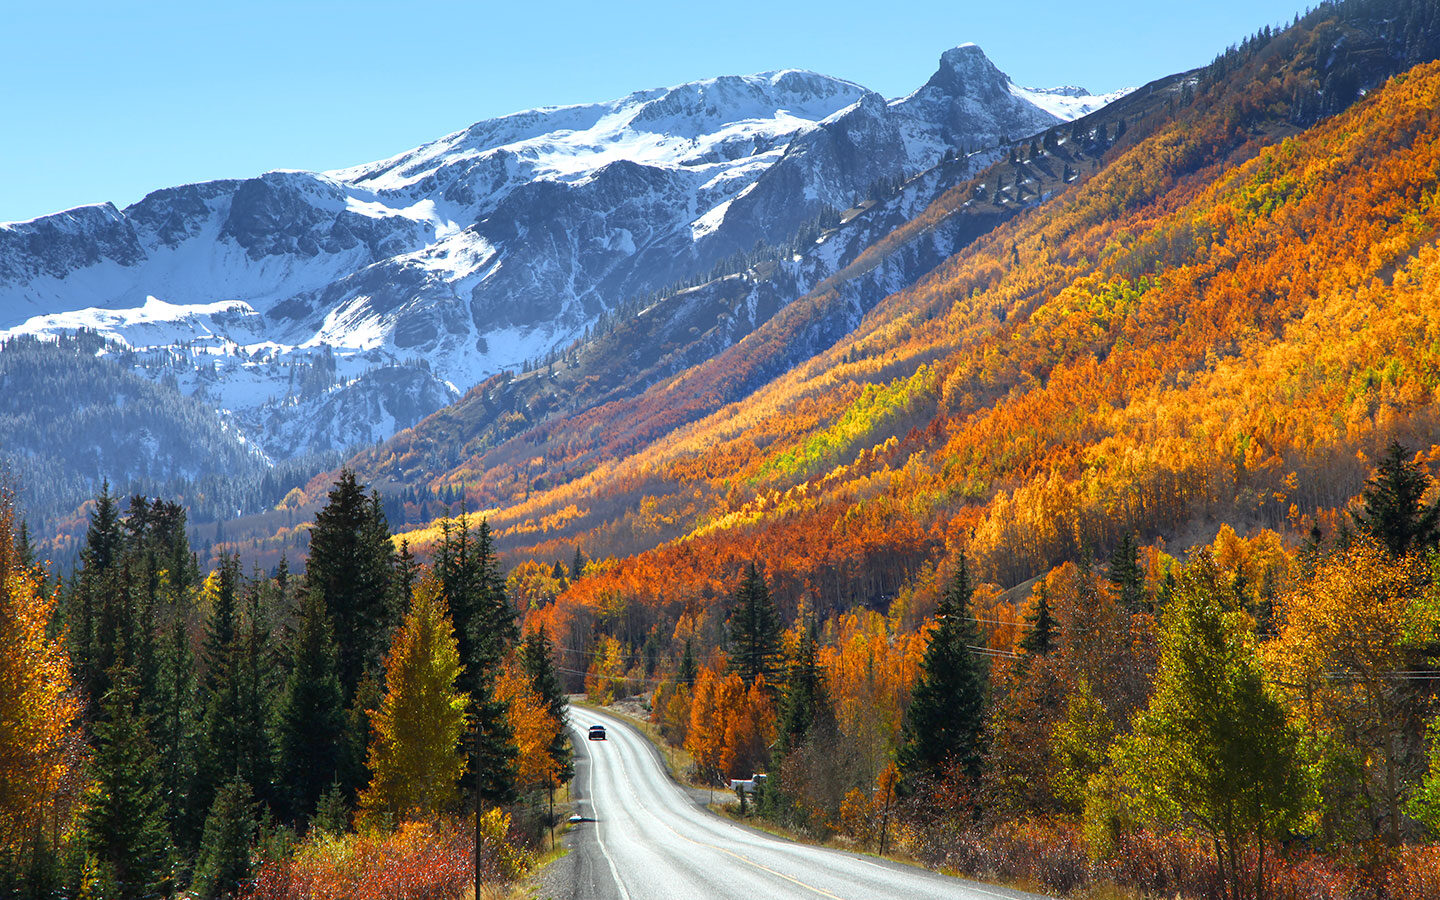 Autumn on the Million Dollar Highway scenic drive in Colorado